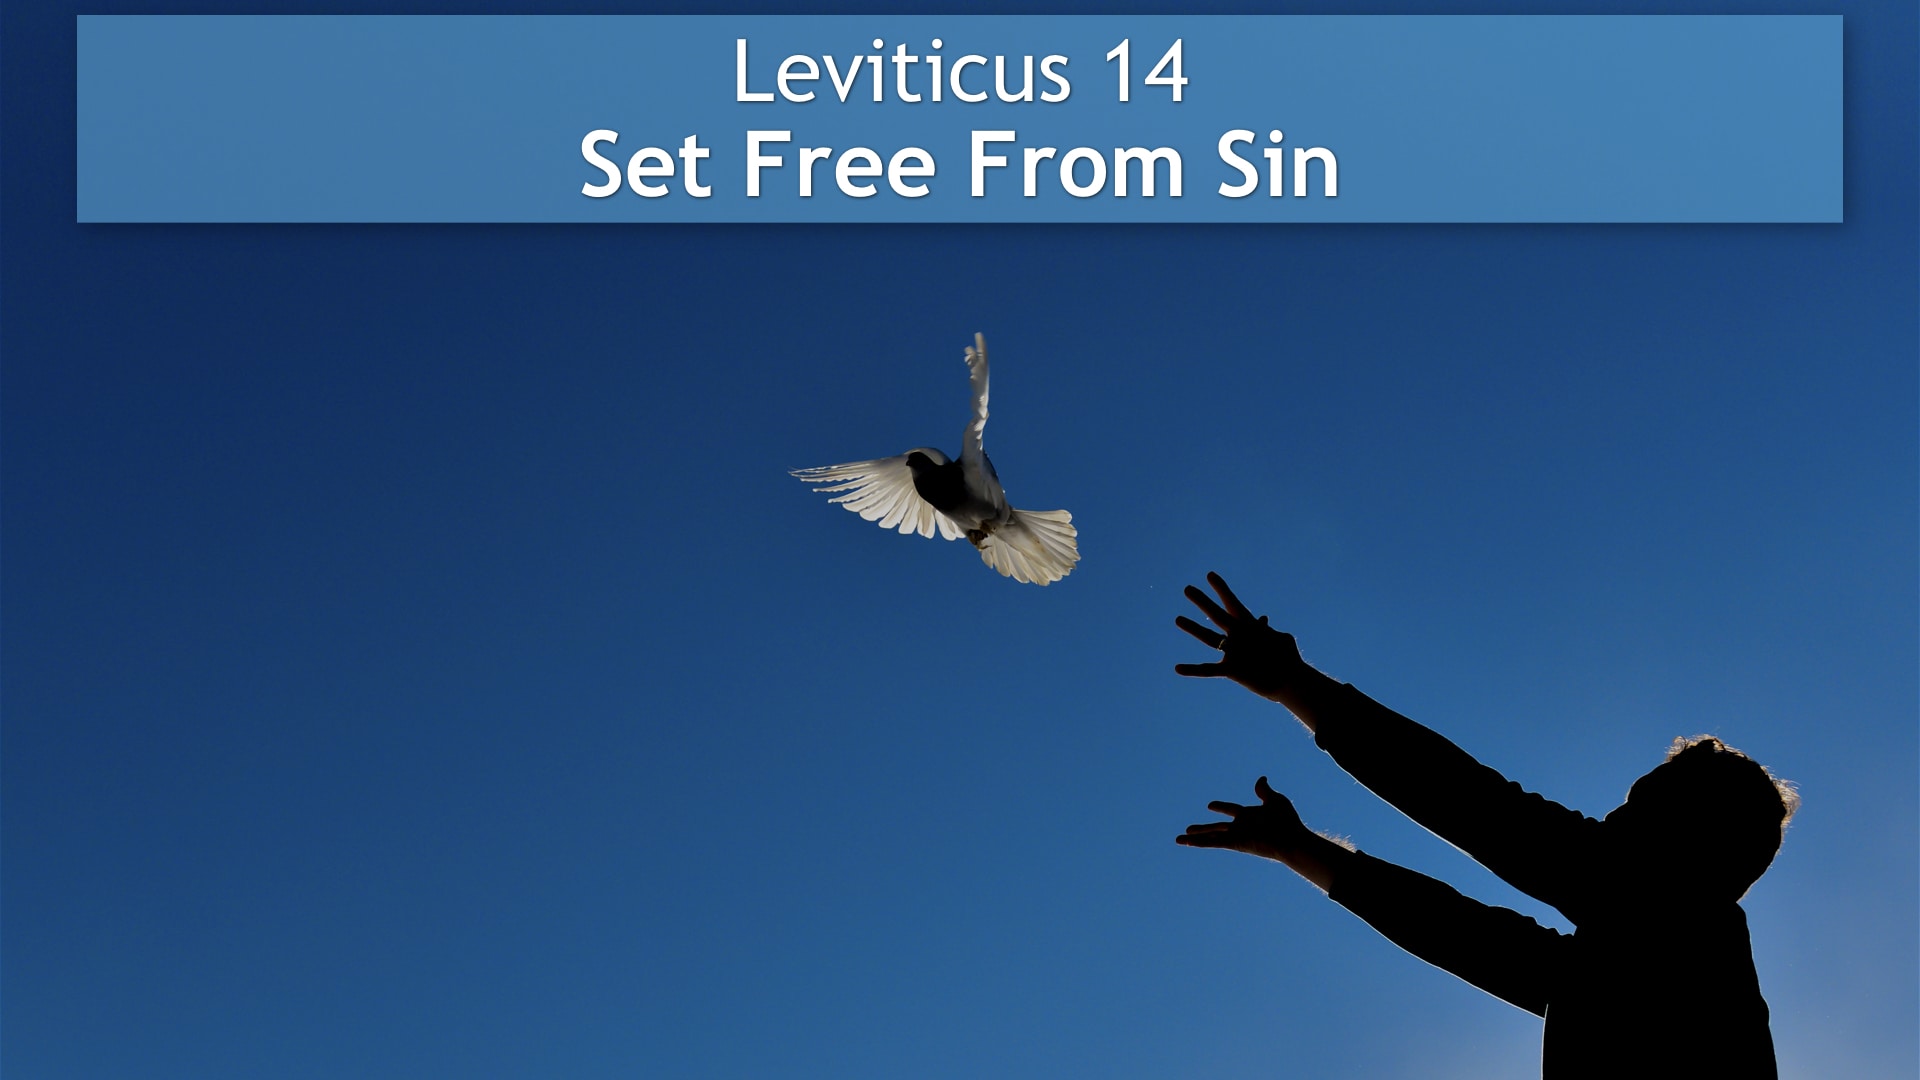 Jerry Simmons teaching Leviticus 14, Set Free From Sin